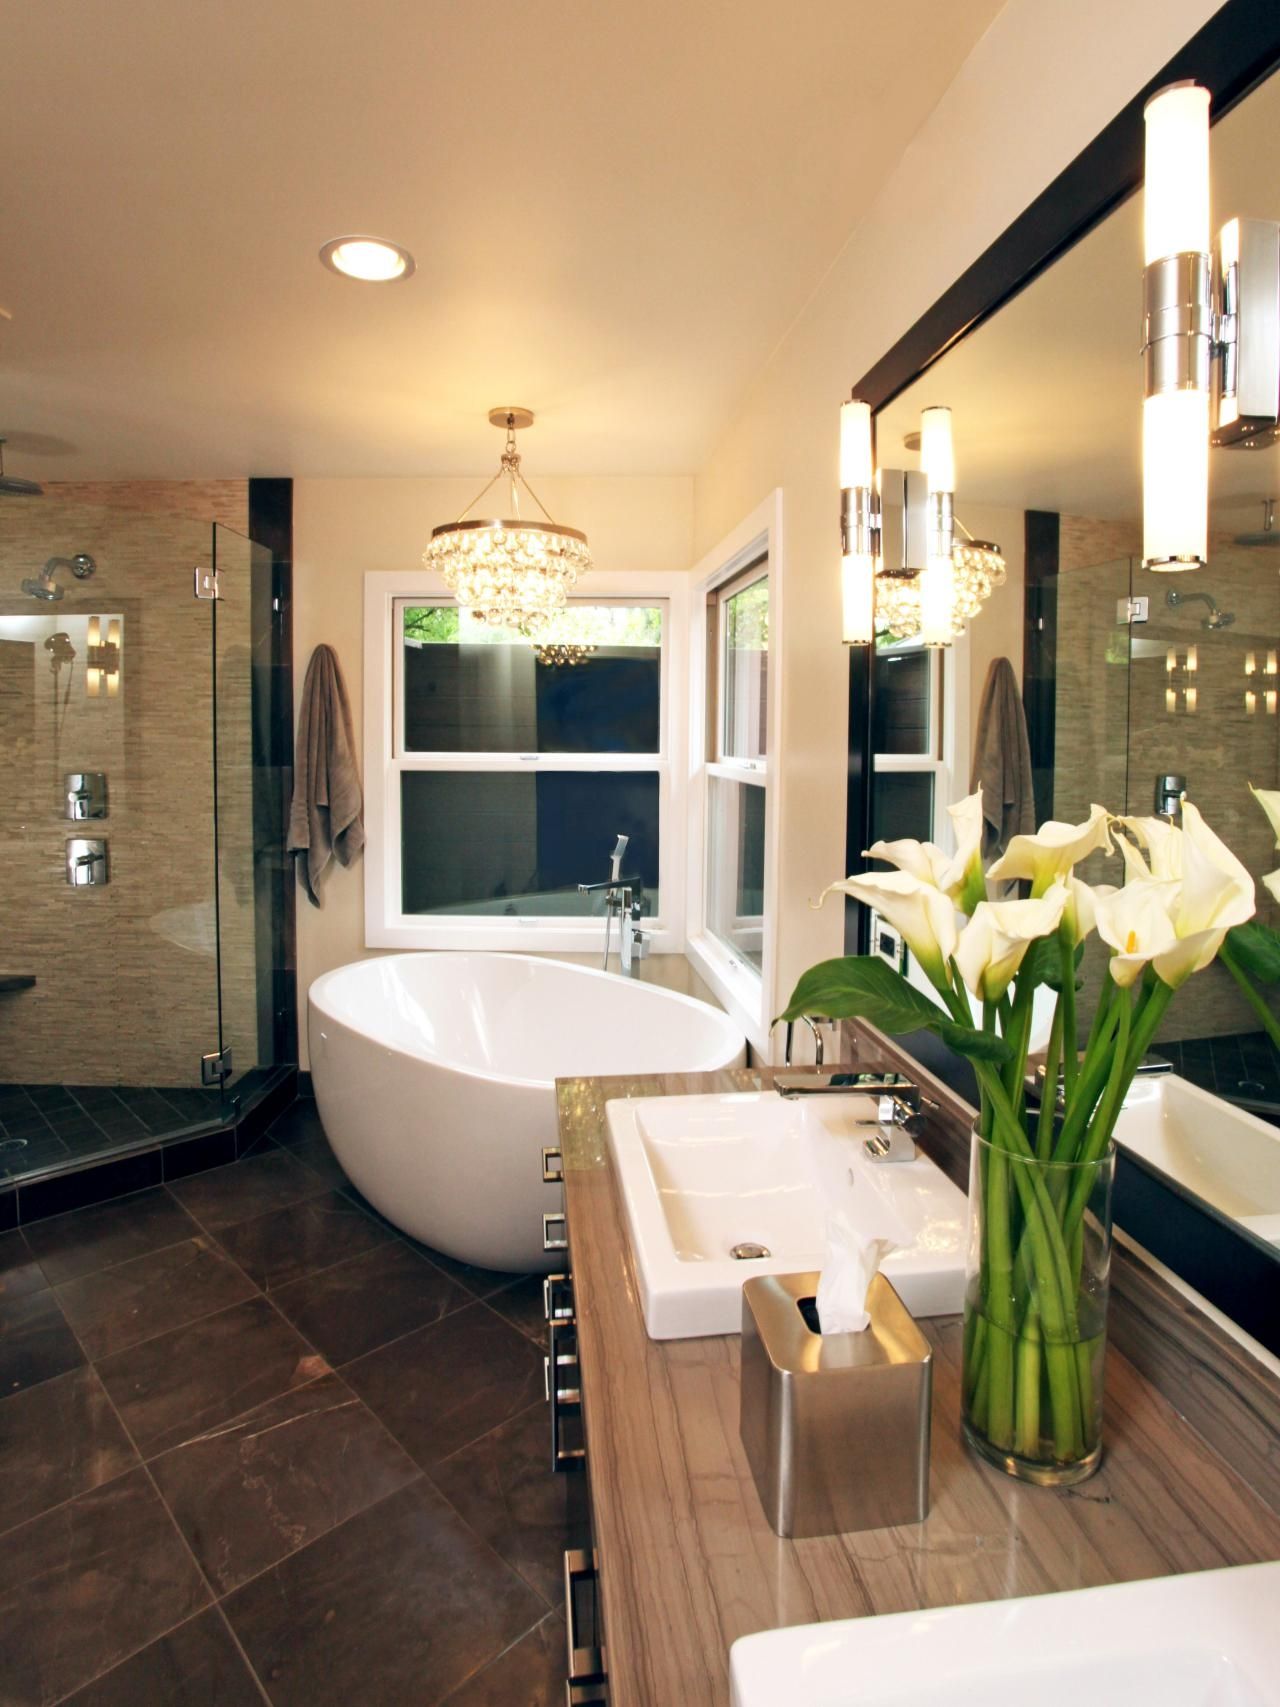 Bathrooms Cool Bathroom With White Bathtub And Modern Bathroom Throughout Modern Bathroom Chandelier Lighting (View 7 of 25)